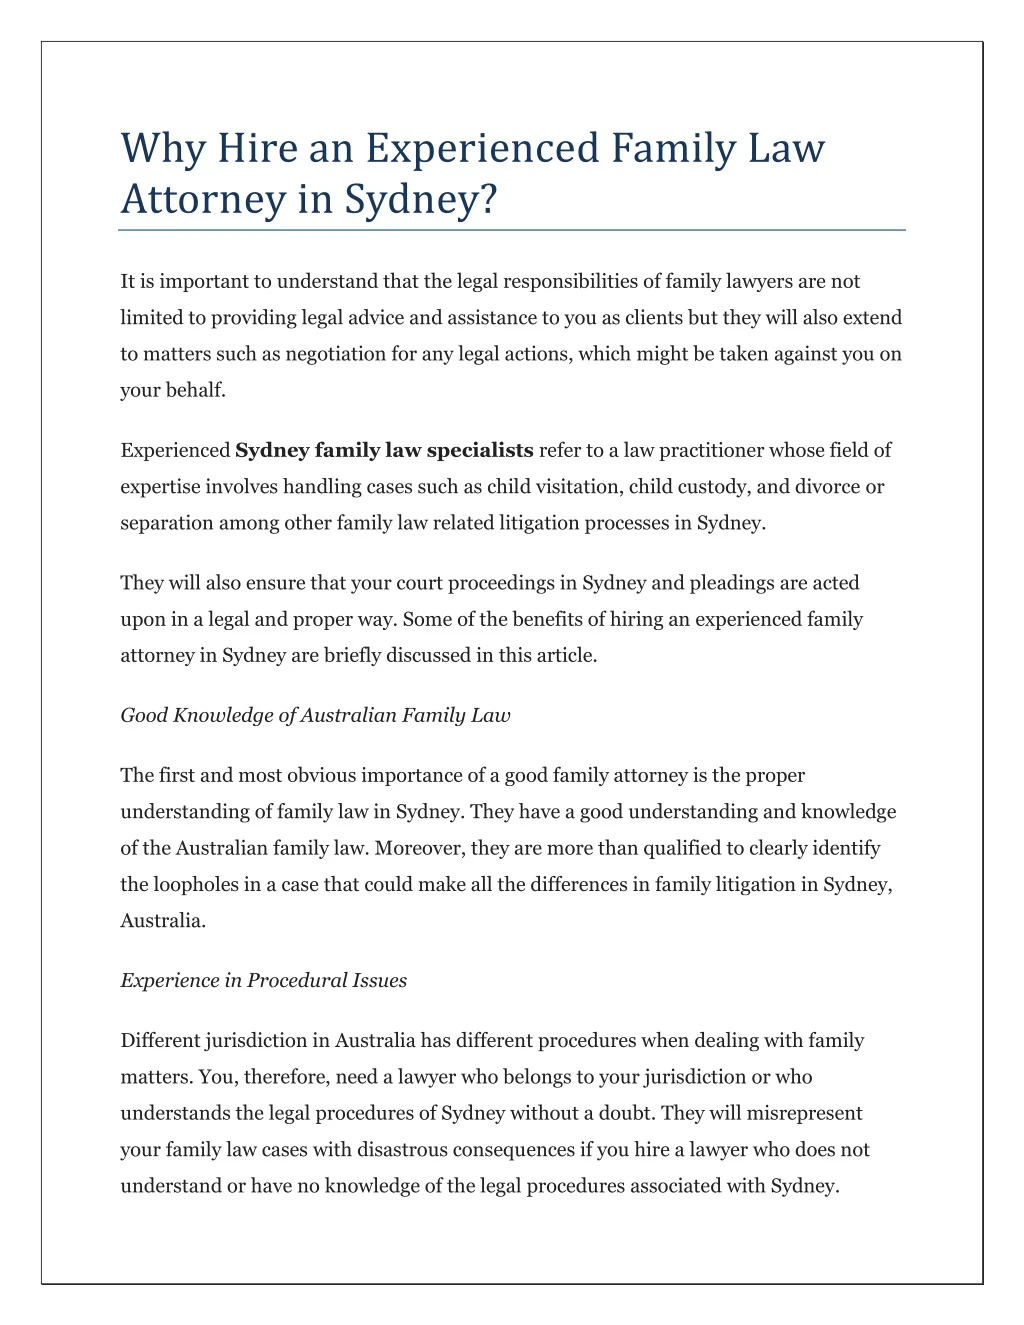 why hire an experienced family law attorney